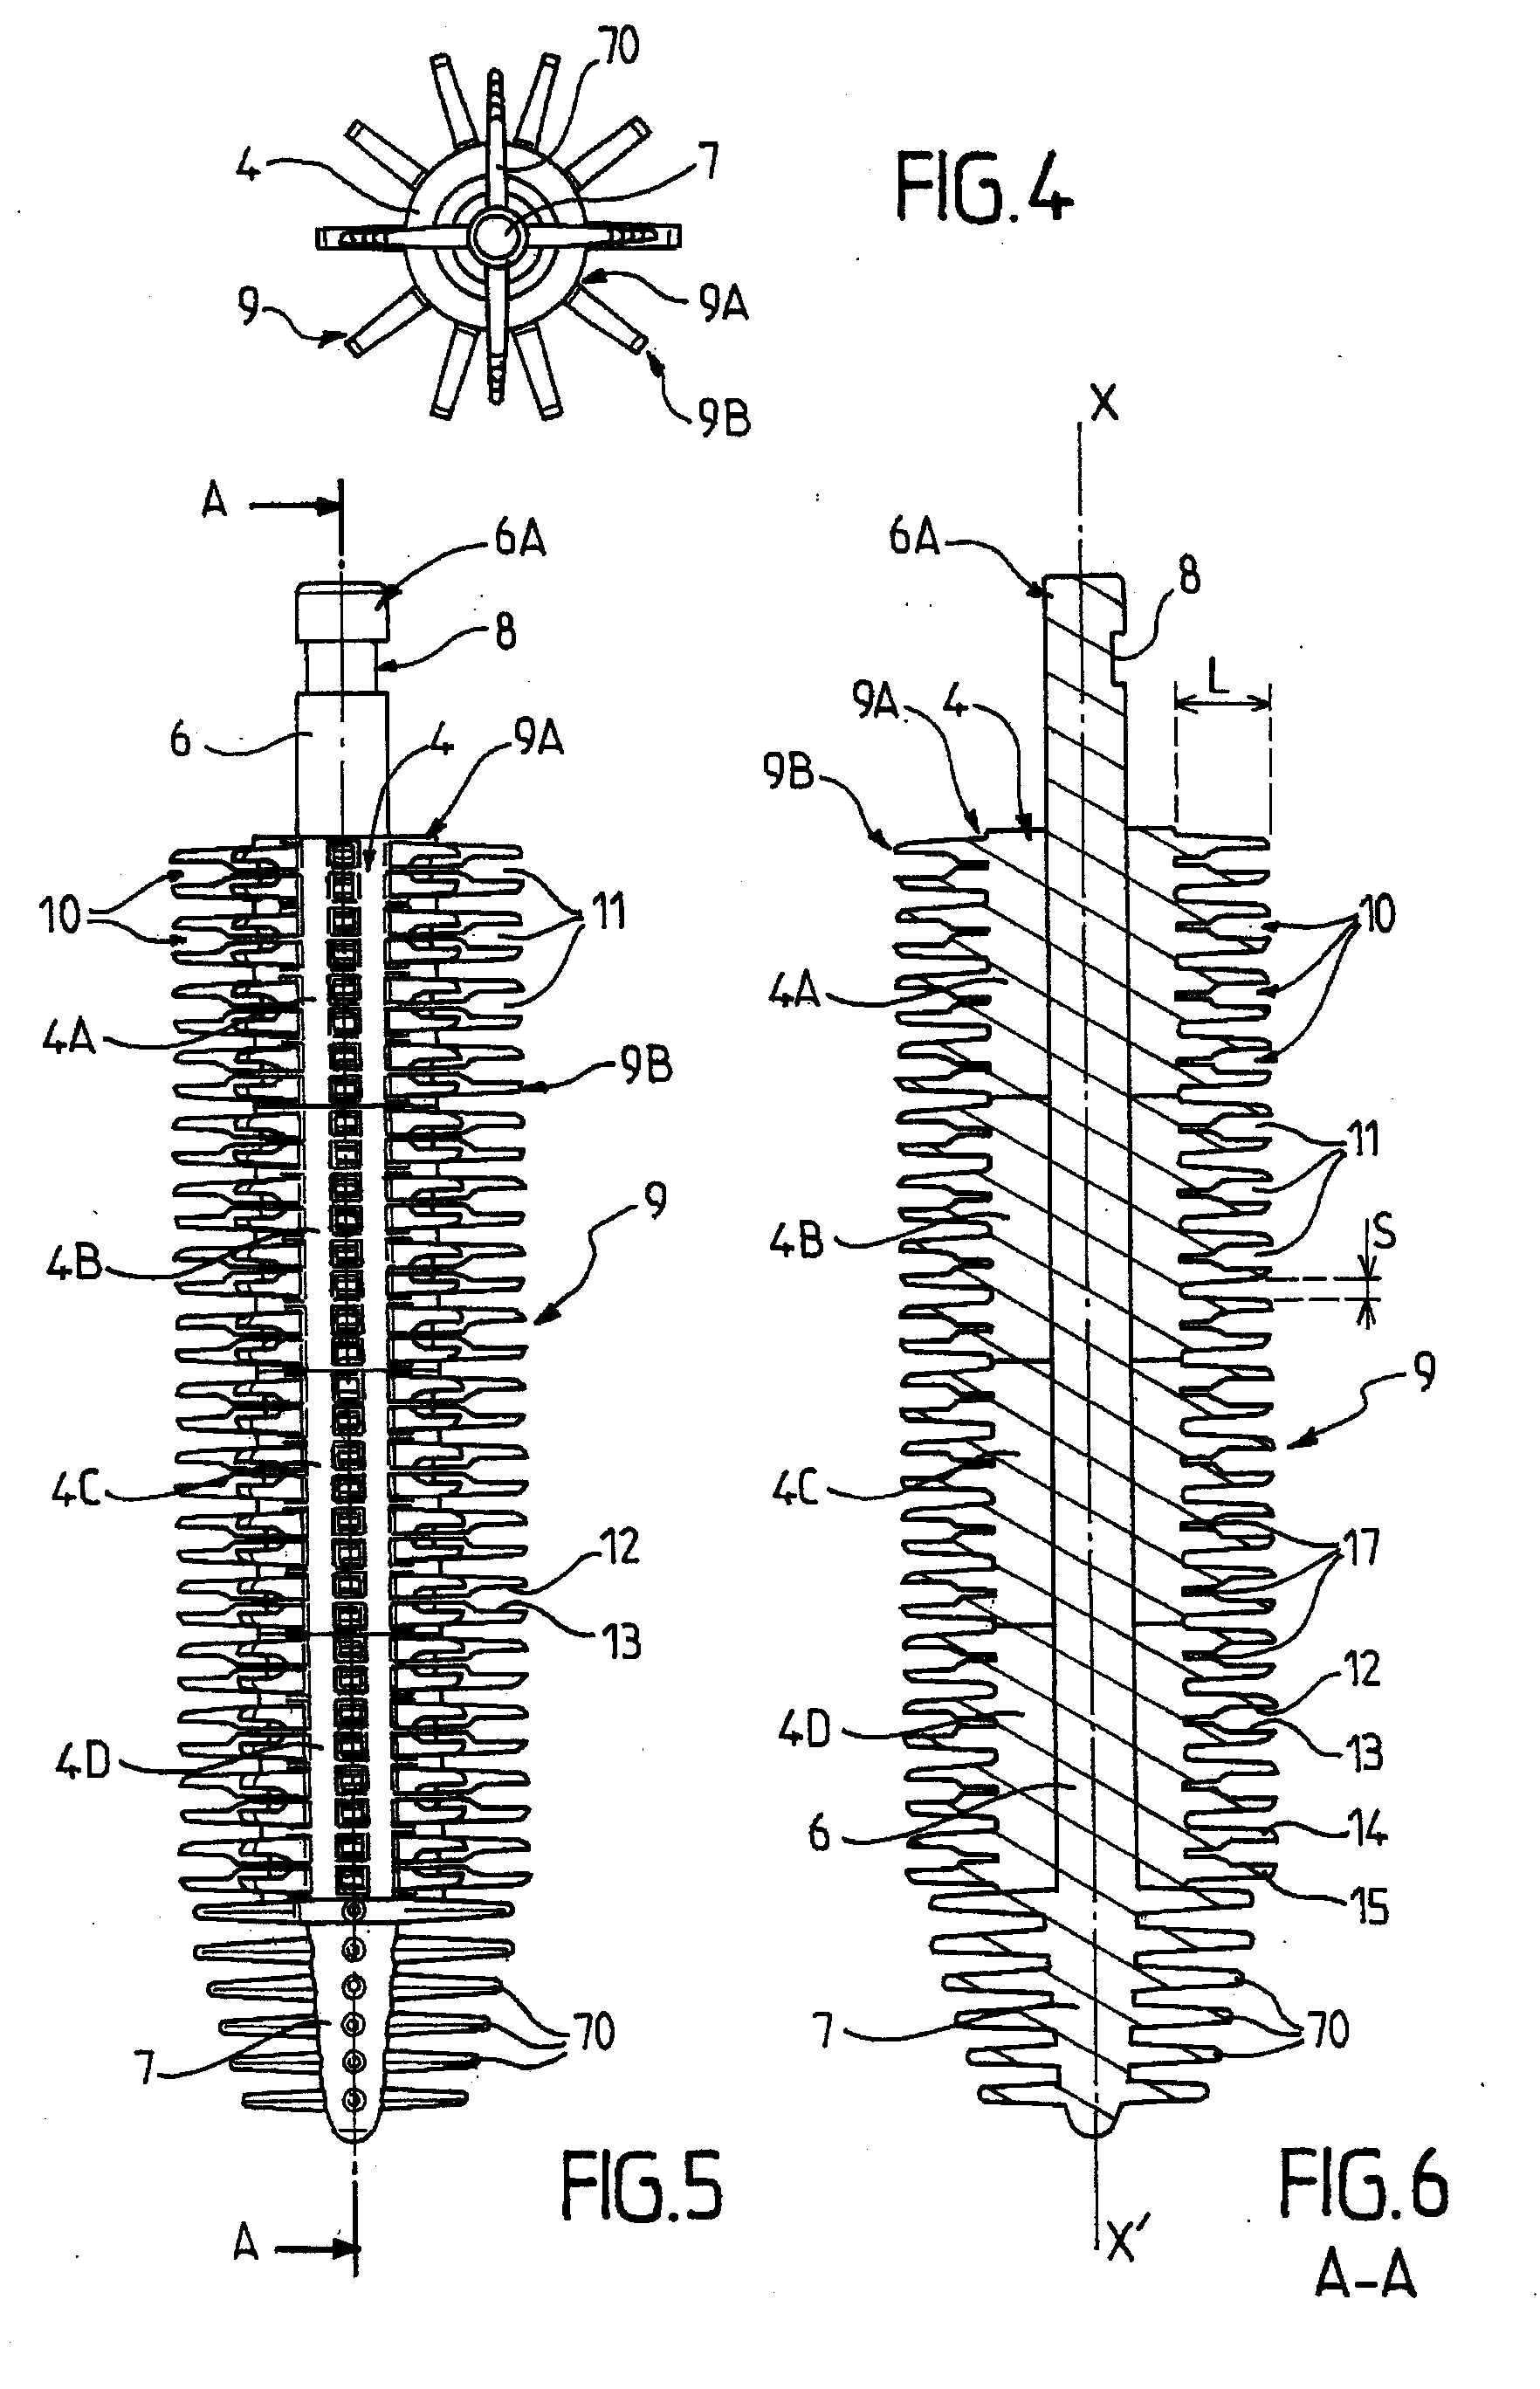 Instrument having walls for applying a composition on eyelashes or eyebrows